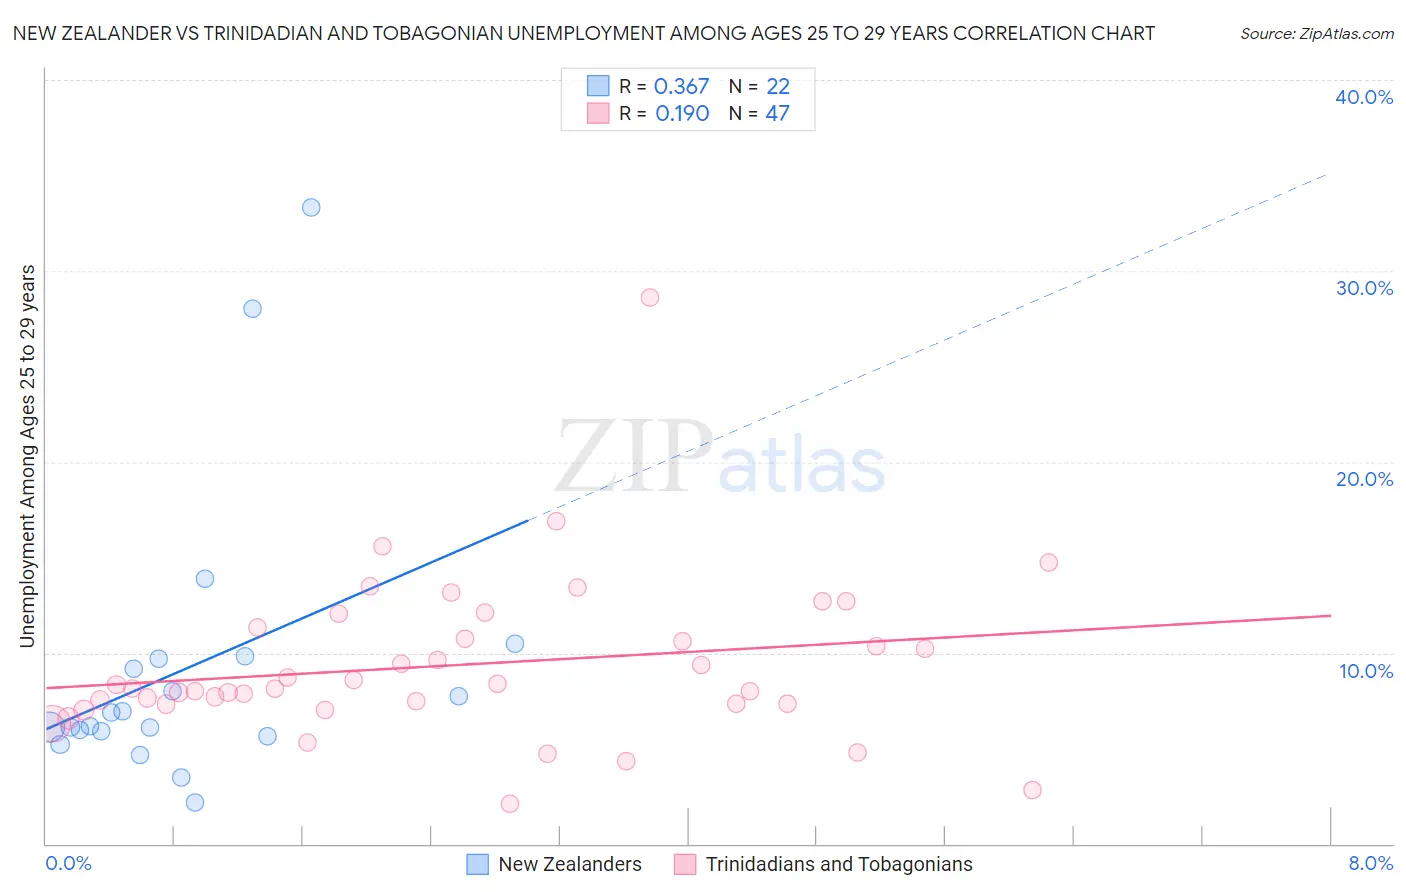 New Zealander vs Trinidadian and Tobagonian Unemployment Among Ages 25 to 29 years